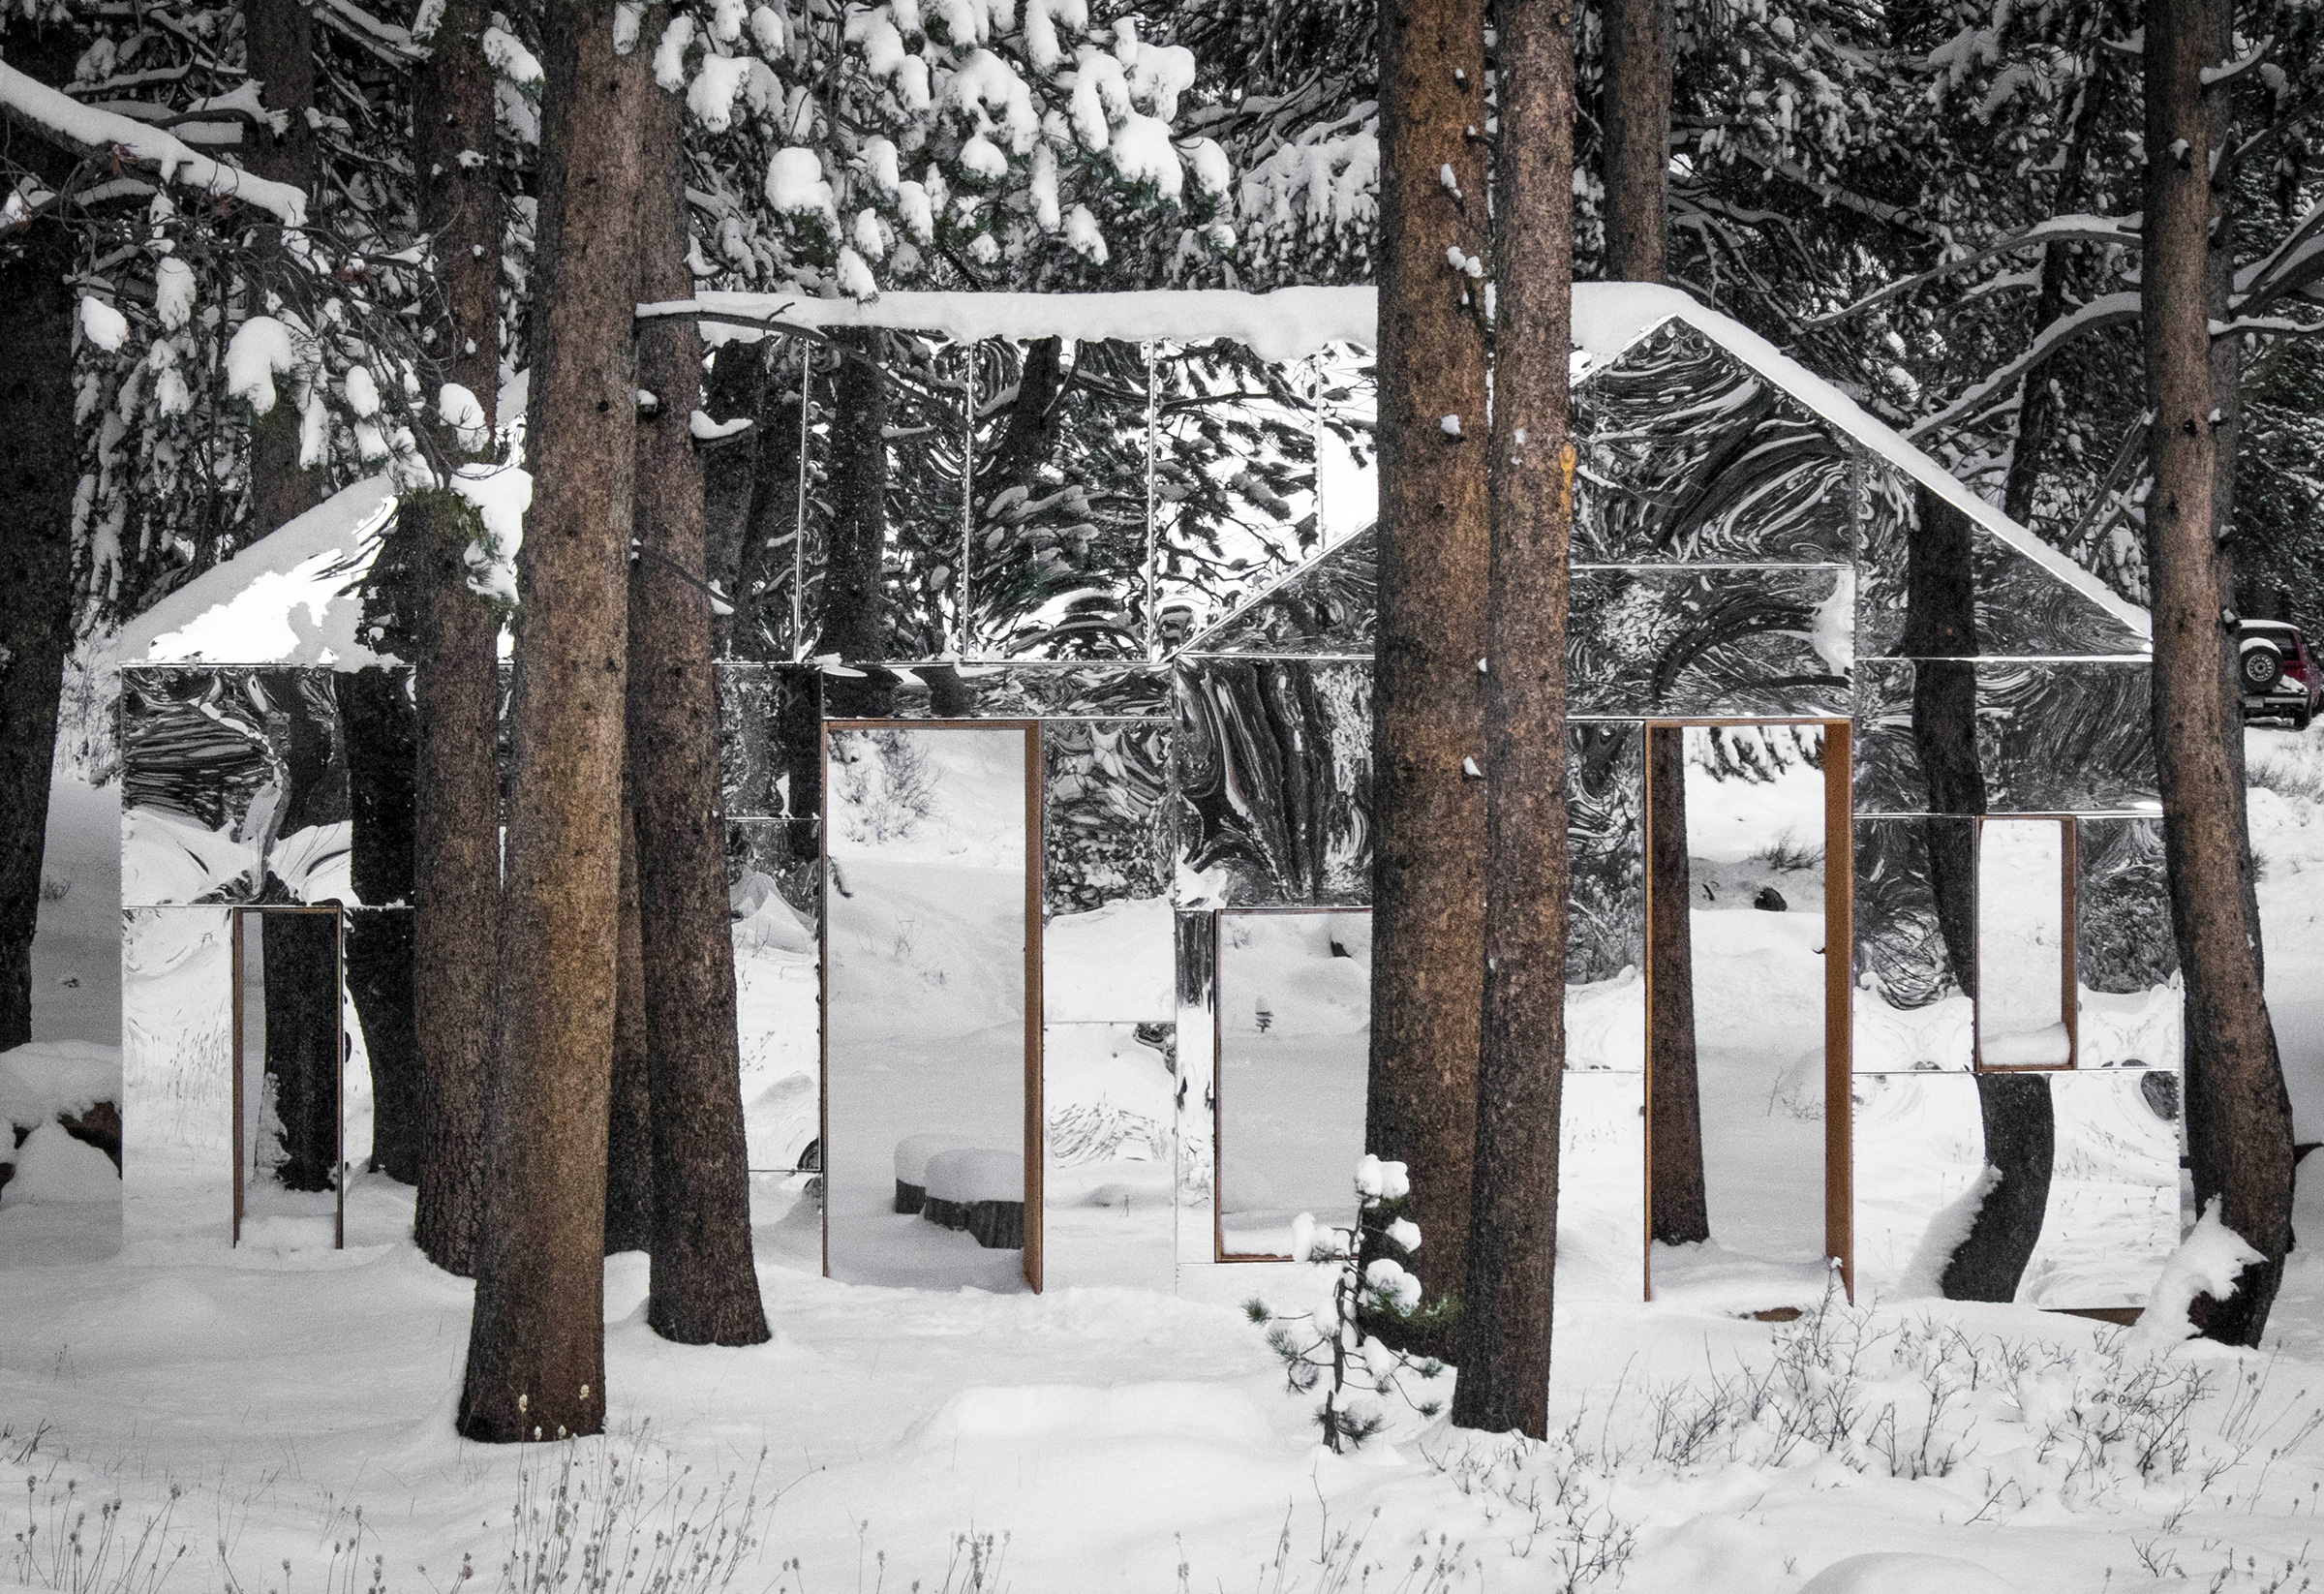 This photograph features a large, mirrored sculpture, set in a wooded, snow-covered area. The sculpture is shaped like a simple house or cabin structure, and the mirrored surface reflects the evergreen trees and snow around it, so the sculpture seems to disappear into the landscape.